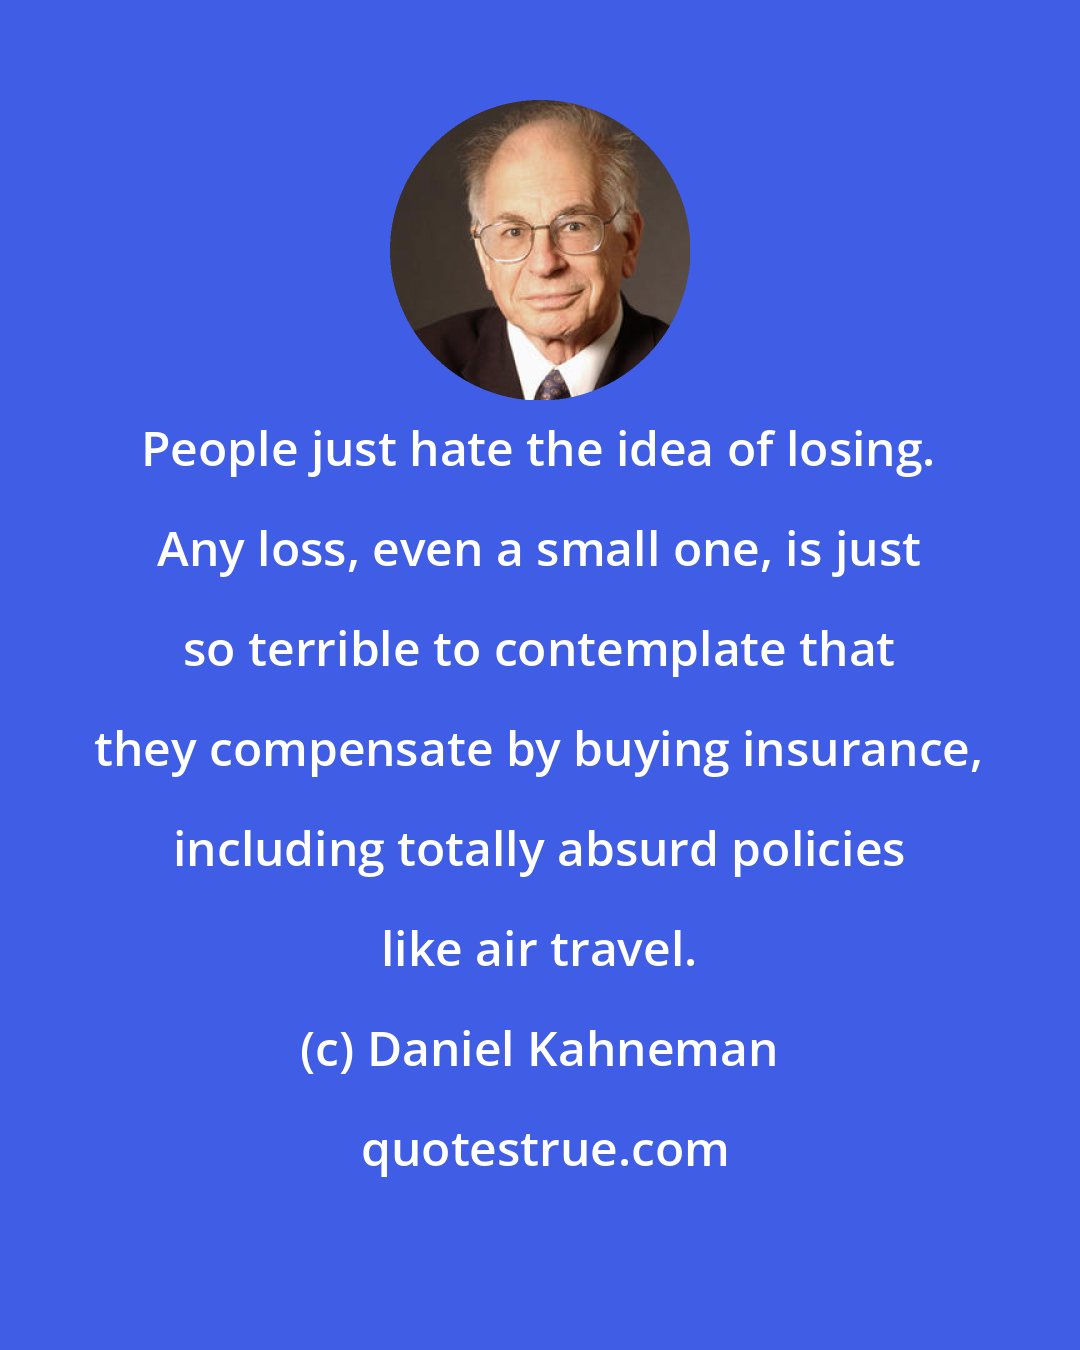 Daniel Kahneman: People just hate the idea of losing. Any loss, even a small one, is just so terrible to contemplate that they compensate by buying insurance, including totally absurd policies like air travel.